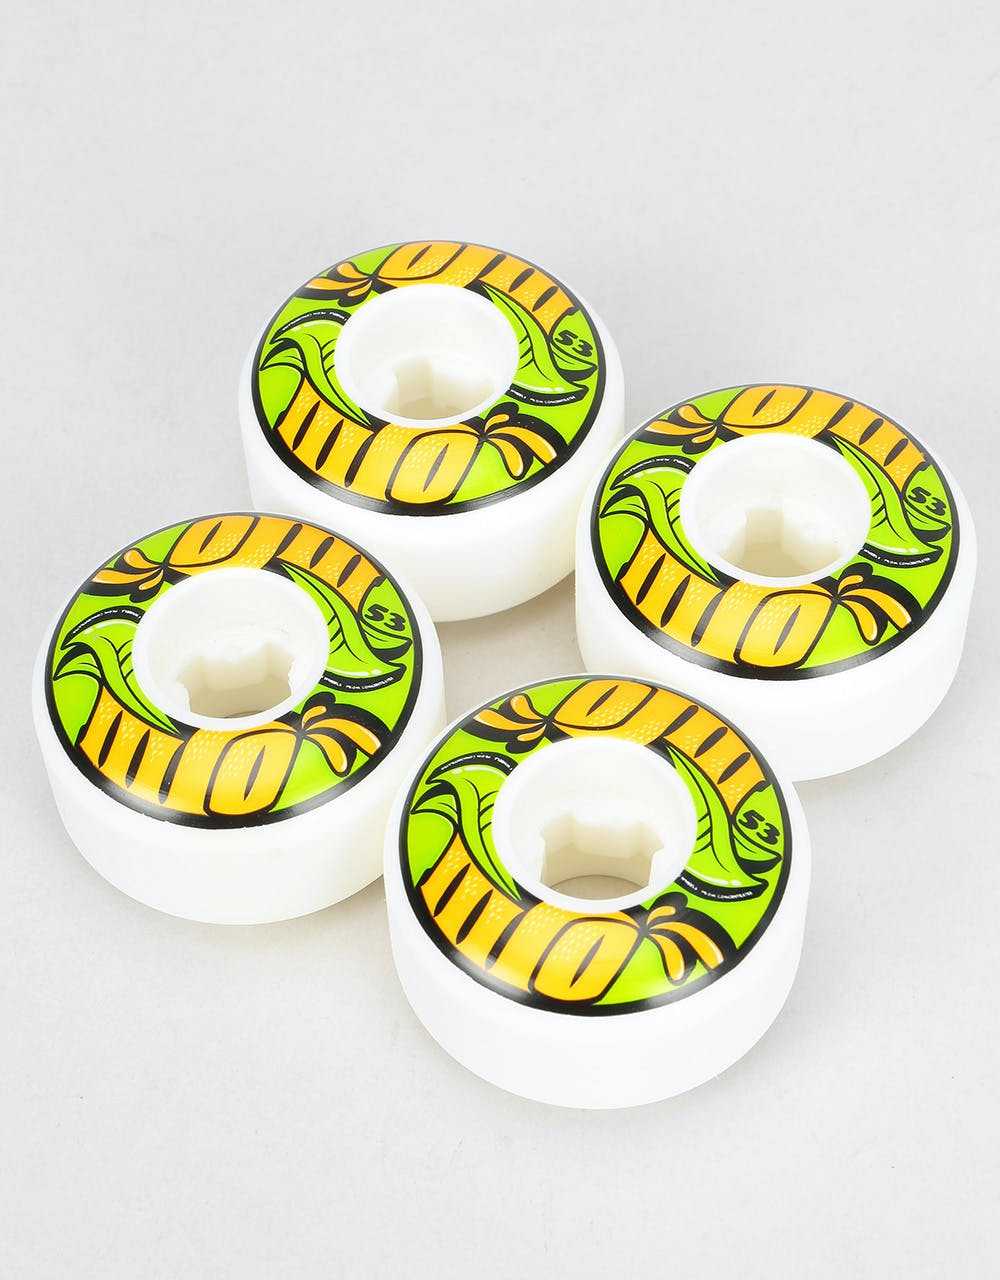 OJ From Concentrate EZ Edge 101a Skateboard Wheel - 53mm